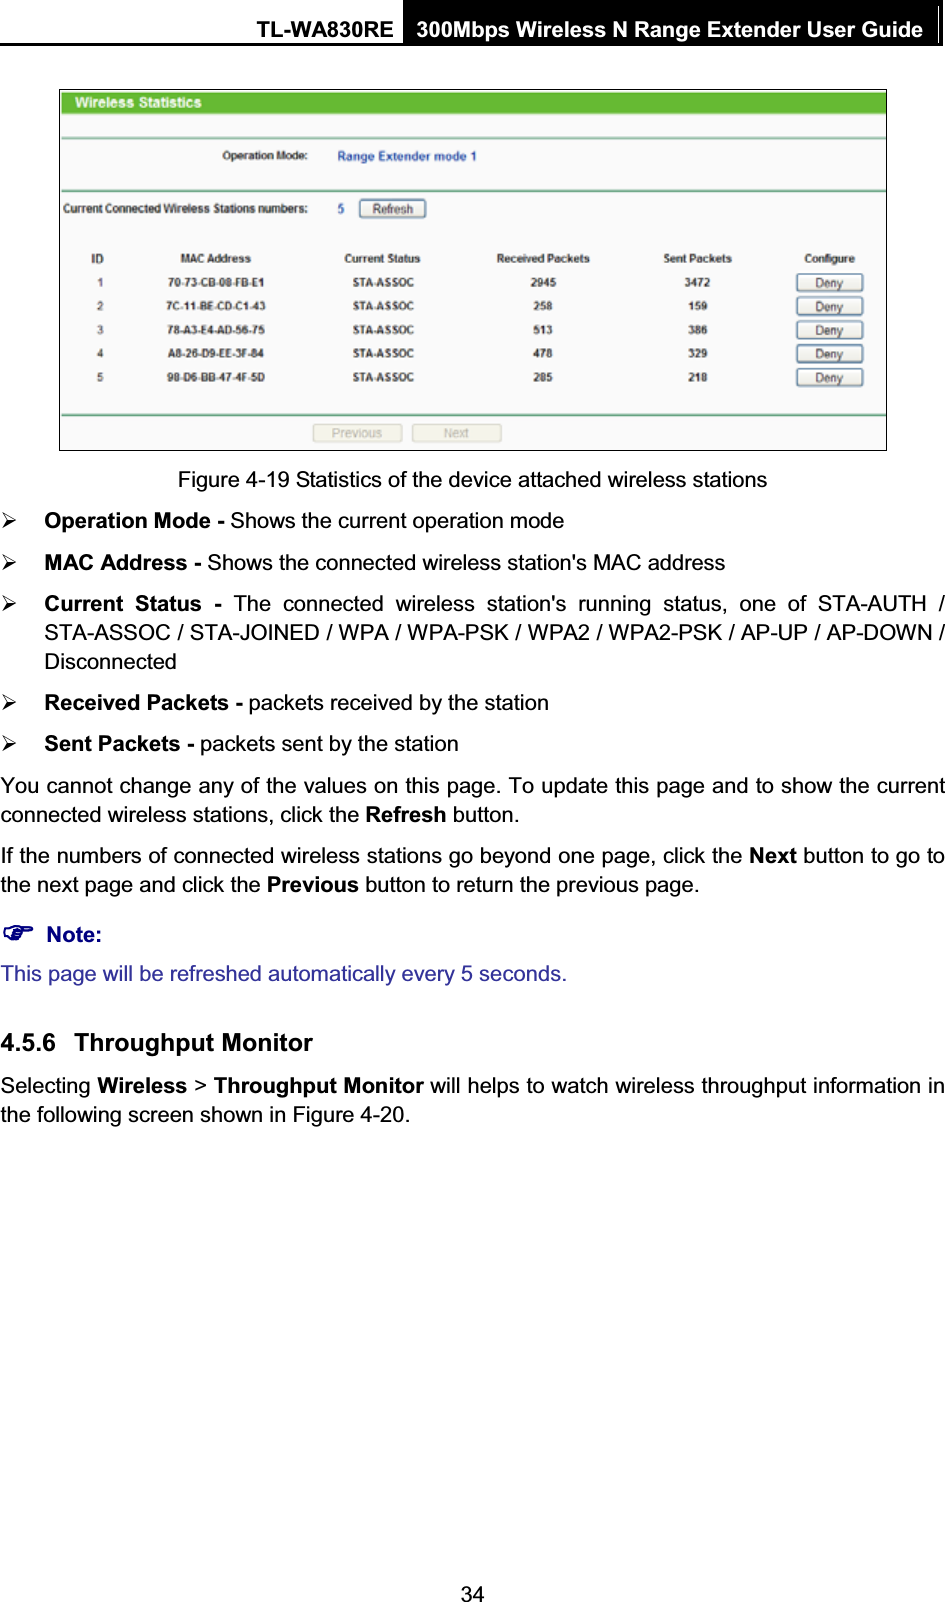 TL-WA830RE  300Mbps Wireless N Range Extender User Guide  34  Figure 4-19 Statistics of the device attached wireless stations ¾ Operation Mode - Shows the current operation mode ¾ MAC Address - Shows the connected wireless station&apos;s MAC address ¾ Current Status - The connected wireless station&apos;s running status, one of STA-AUTH / STA-ASSOC / STA-JOINED / WPA / WPA-PSK / WPA2 / WPA2-PSK / AP-UP / AP-DOWN / Disconnected ¾ Received Packets - packets received by the station ¾ Sent Packets - packets sent by the station You cannot change any of the values on this page. To update this page and to show the current connected wireless stations, click the Refresh button. If the numbers of connected wireless stations go beyond one page, click the Next button to go to the next page and click the Previous button to return the previous page. )) Note: This page will be refreshed automatically every 5 seconds. 4.5.6 Throughput Monitor Selecting Wireless &gt; Throughput Monitor will helps to watch wireless throughput information in the following screen shown in Figure 4-20. 